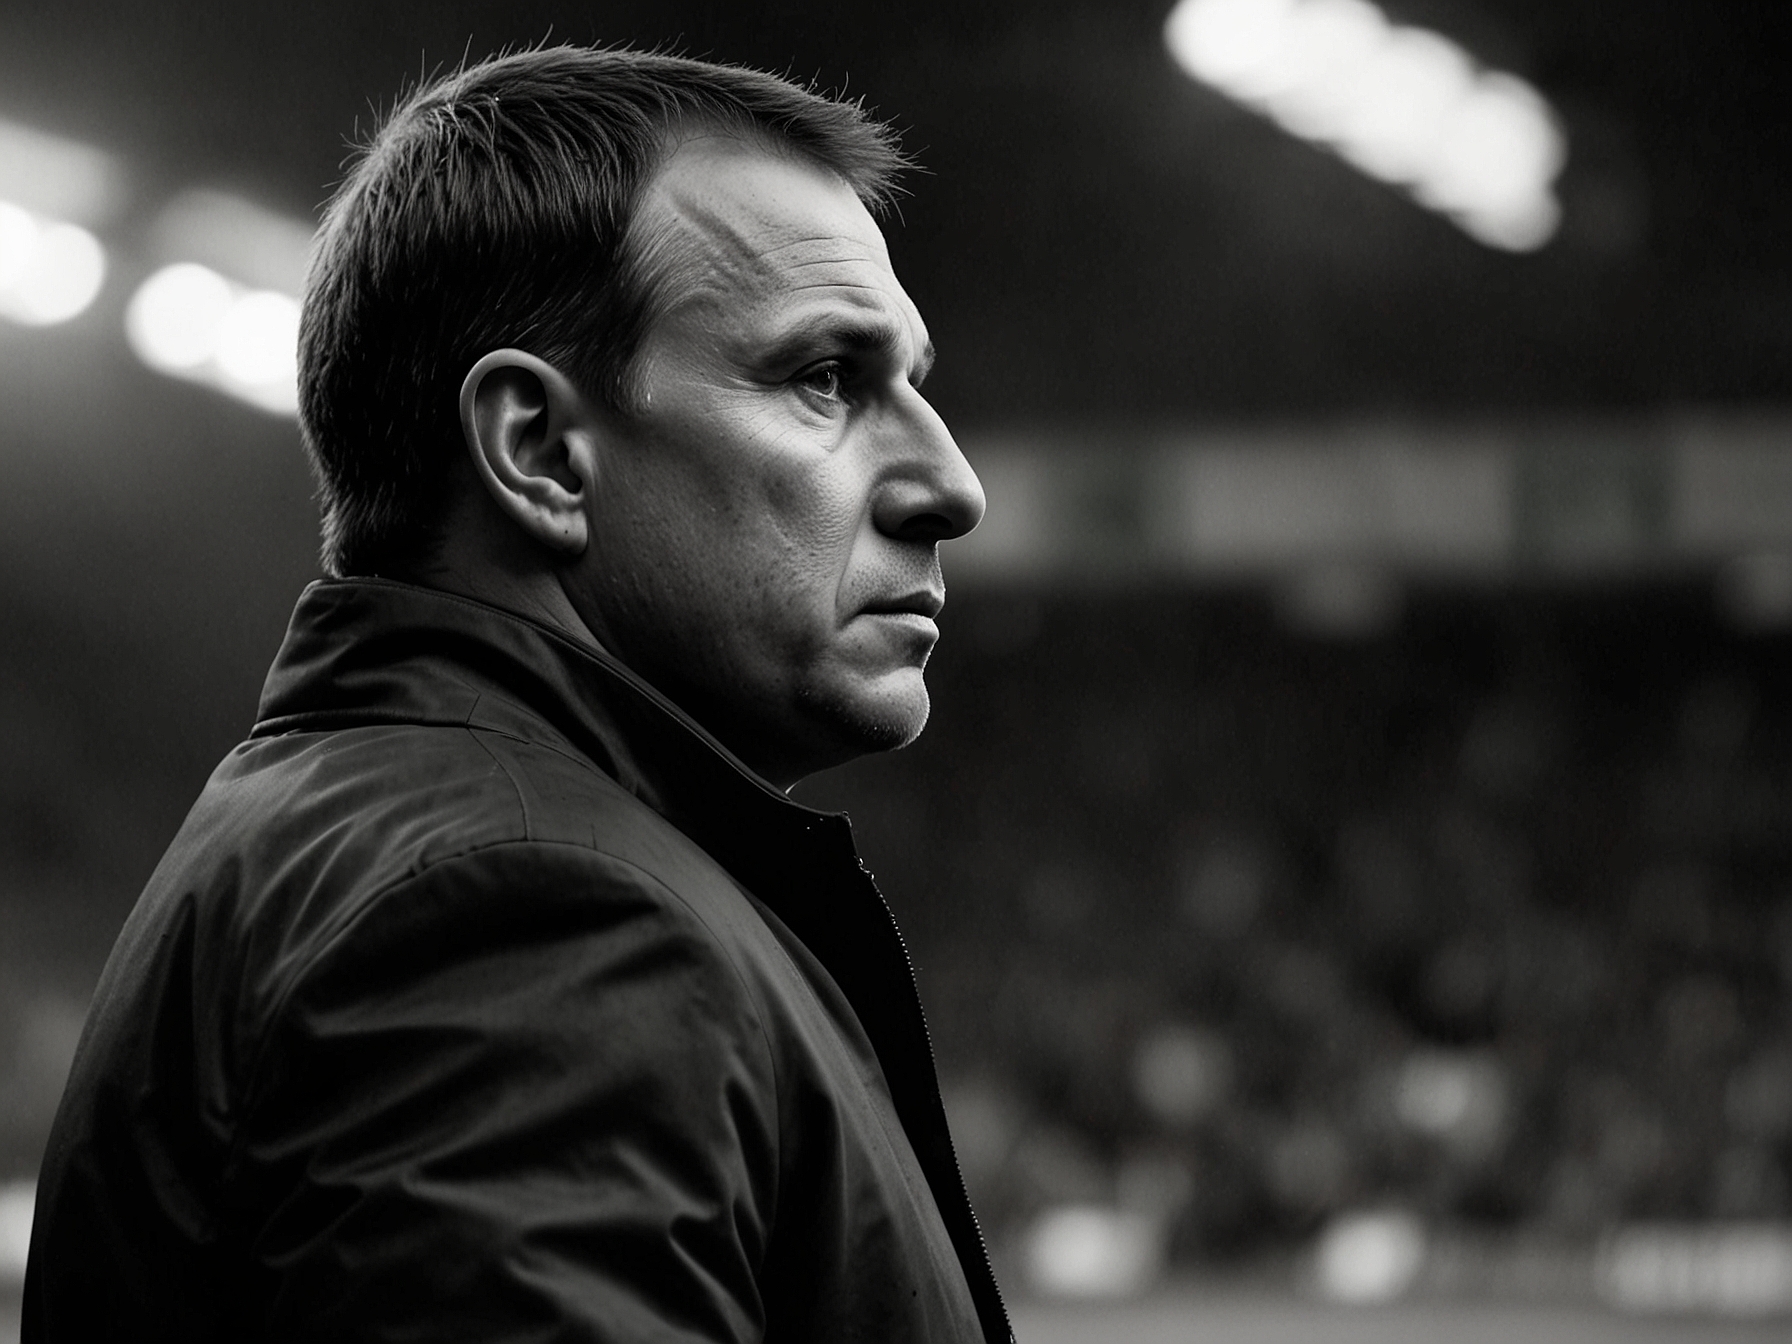 A depiction of Brendan Rodgers on the sidelines, deep in thought, representing the critical decision-making process in finding a new goalkeeper for Celtic FC amid financial and market constraints.